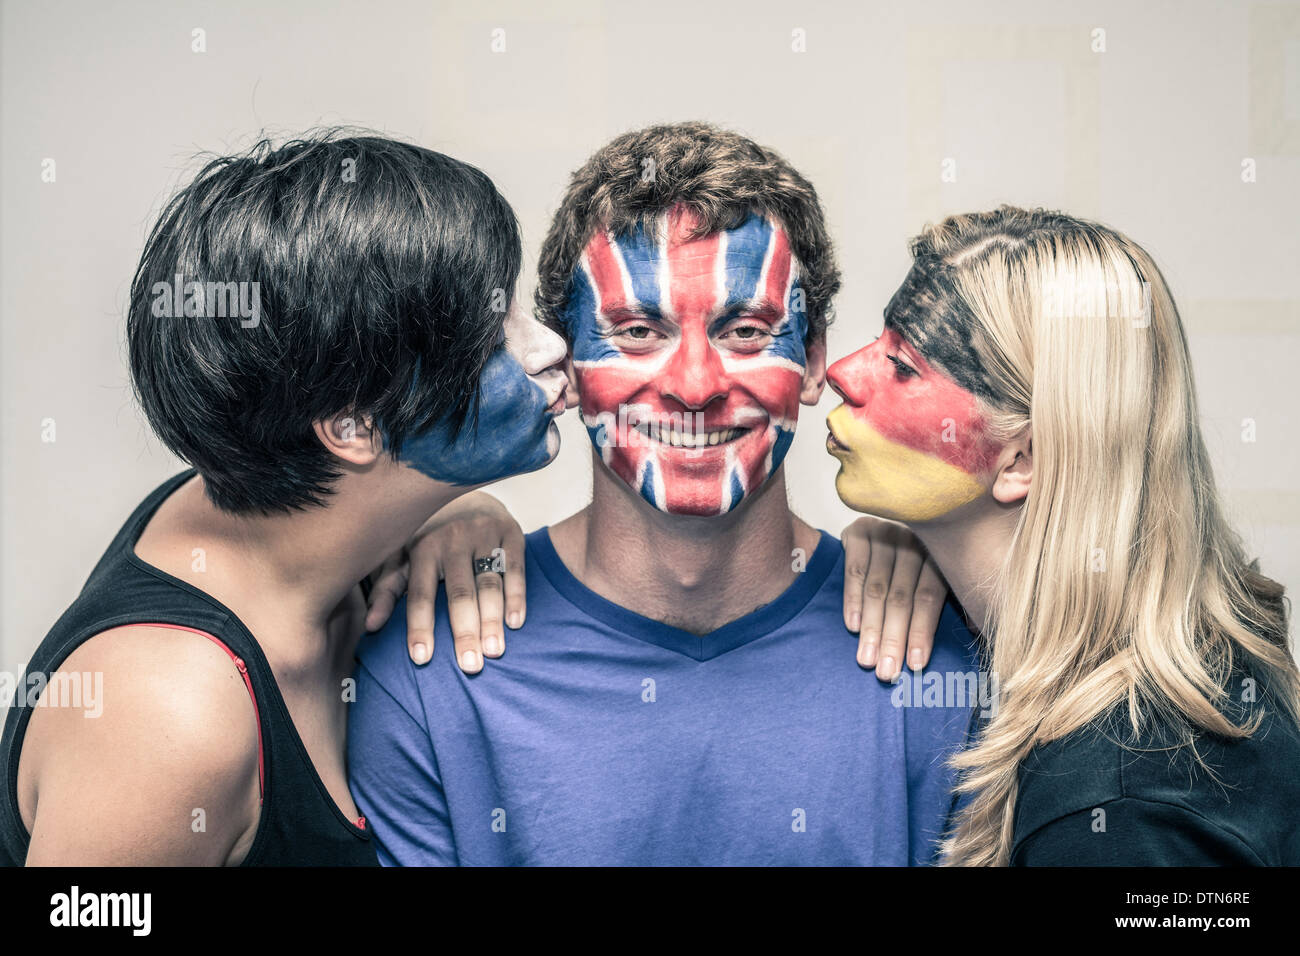 Happy women kissing man with painted European flags on their faces. Stock Photo